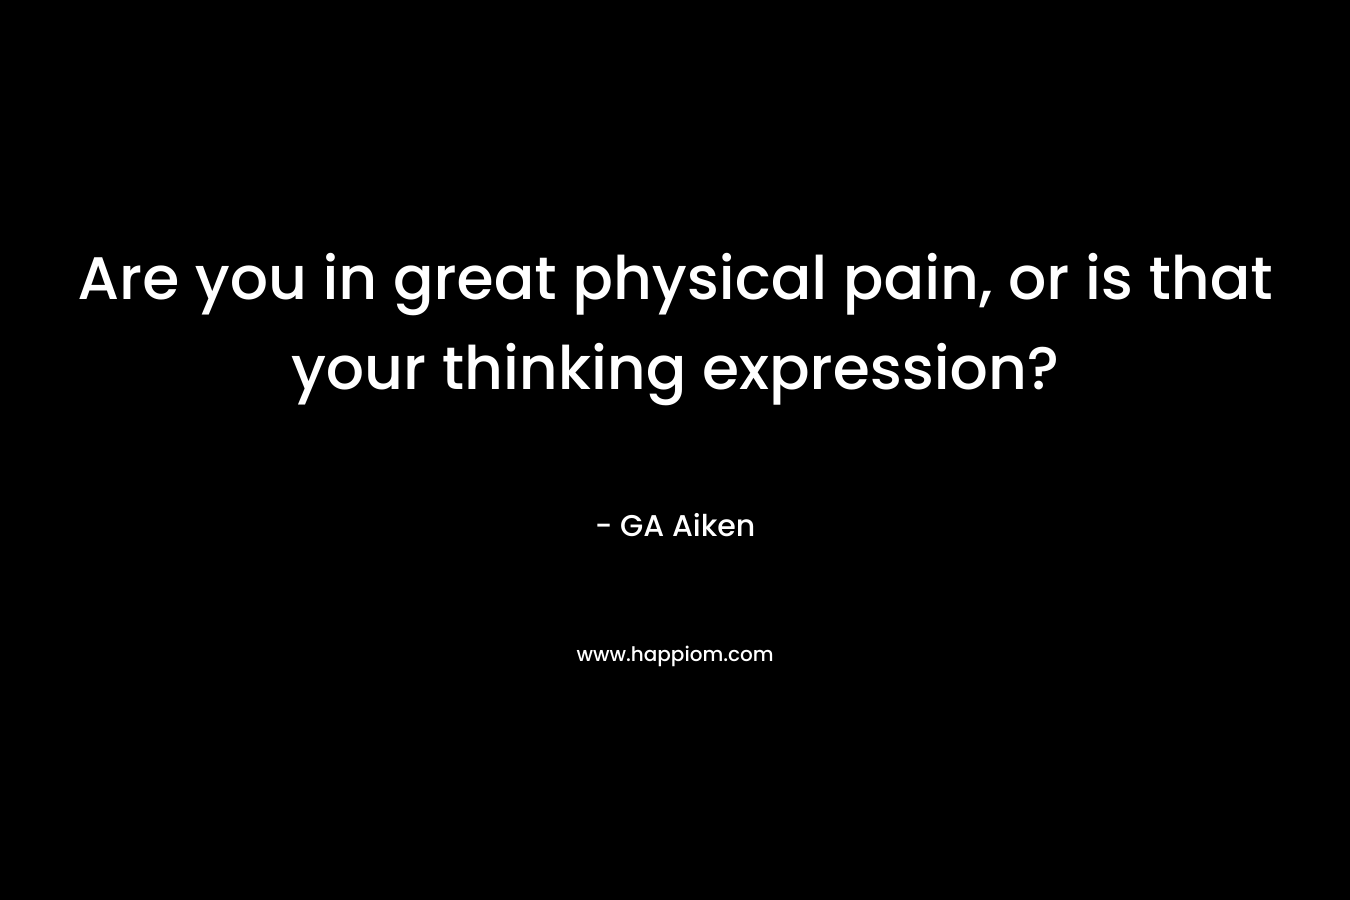 Are you in great physical pain, or is that your thinking expression?